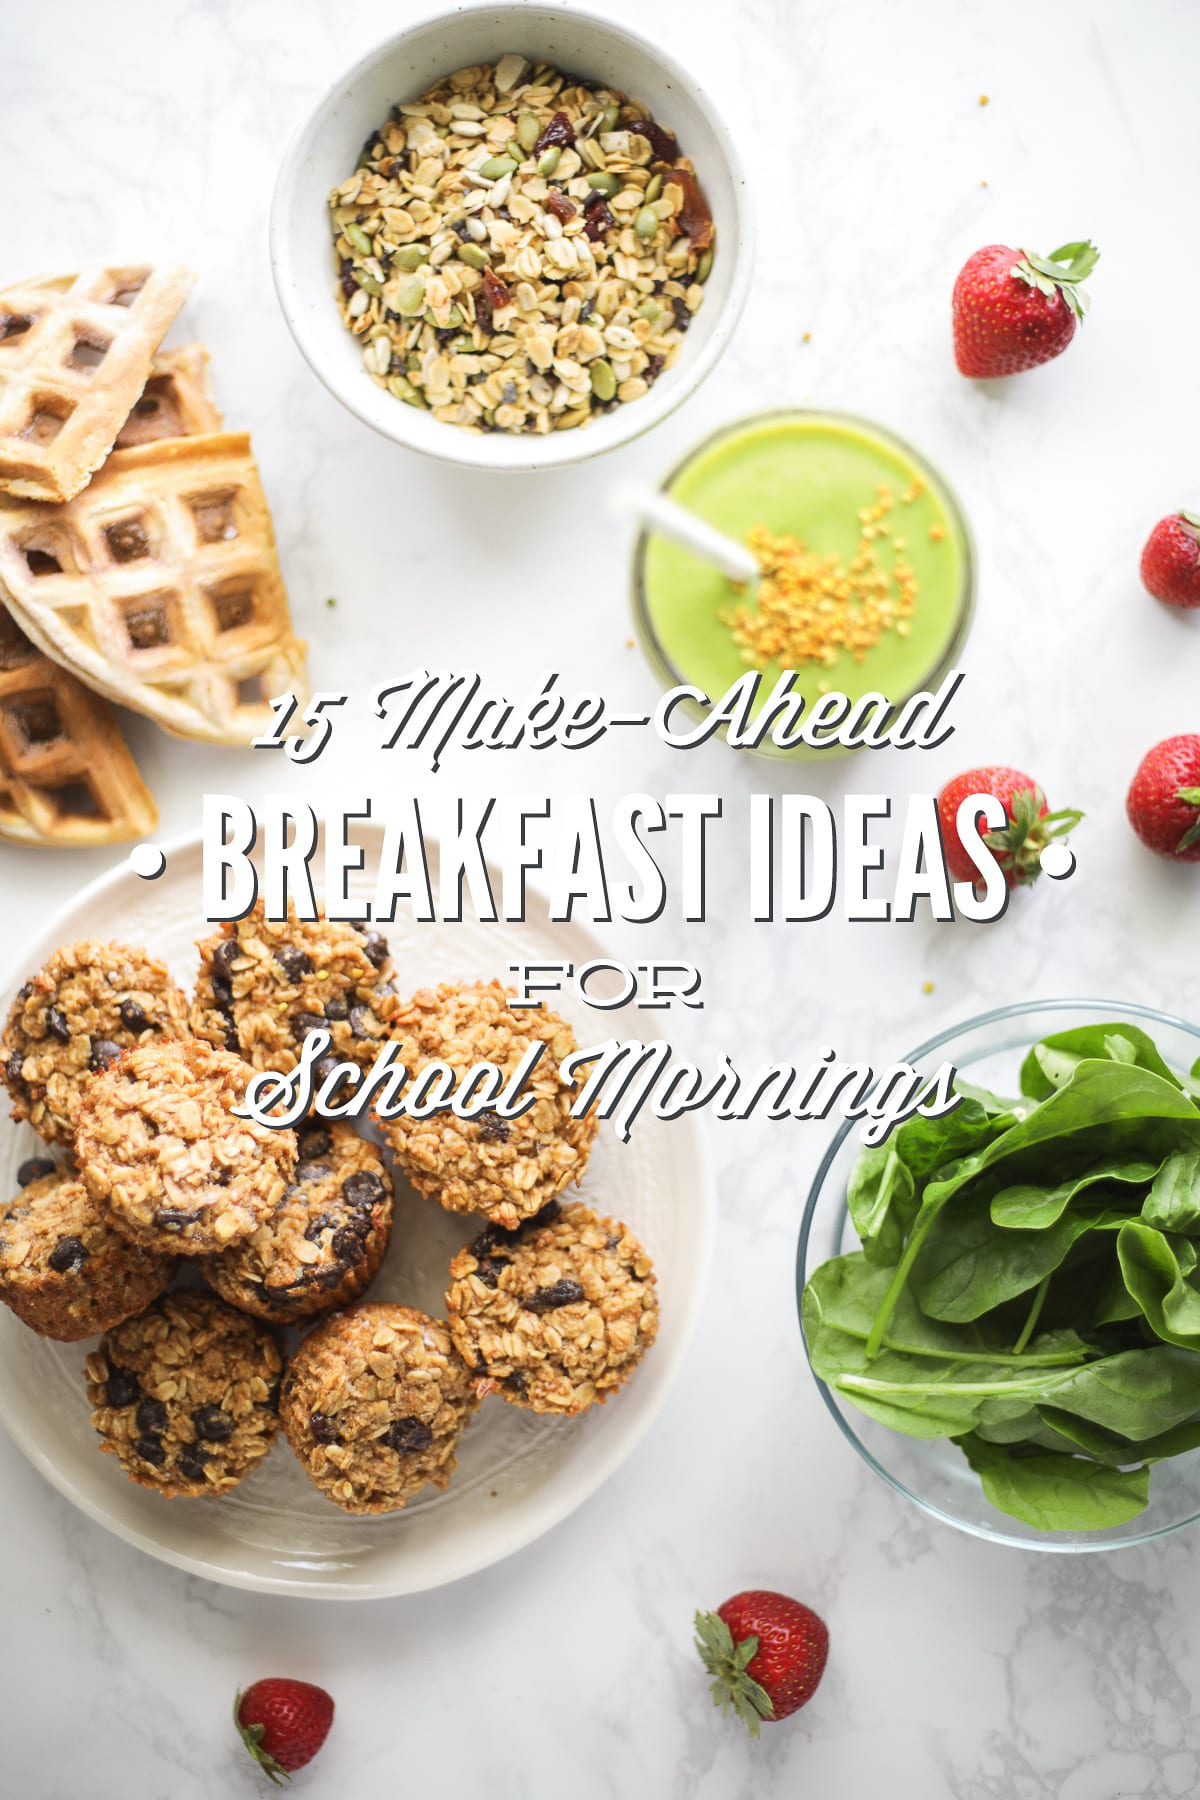 15 (Real Food) Make-Ahead Breakfast Ideas For School Mornings (with Freezer-Friendly Options)